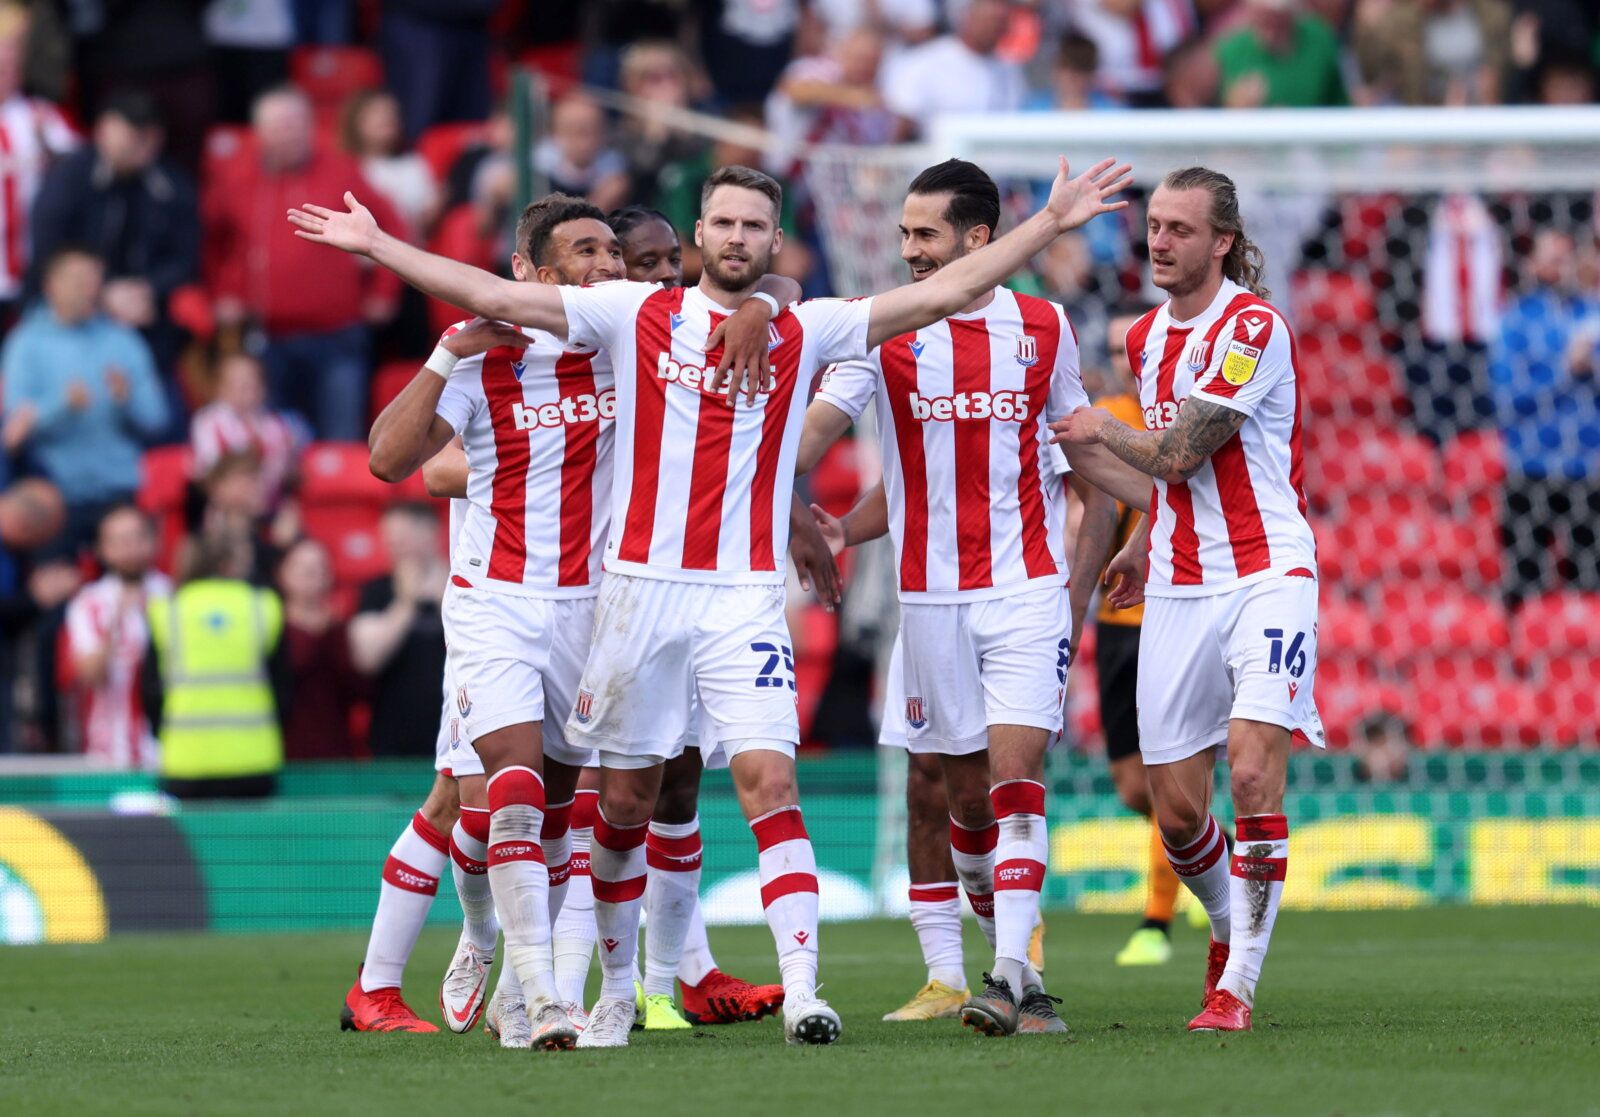 Soccer Football - England - Championship - Stoke City v Hull City - bet365 Stadium, Stoke-on-Trent, Britain - September 25, 2021  Stoke City's Nick Powell celebrates scoring their second goal with teammates  Action Images/John Clifton   EDITORIAL USE ONLY. No use with unauthorized audio, video, data, fixture lists, club/league logos or 